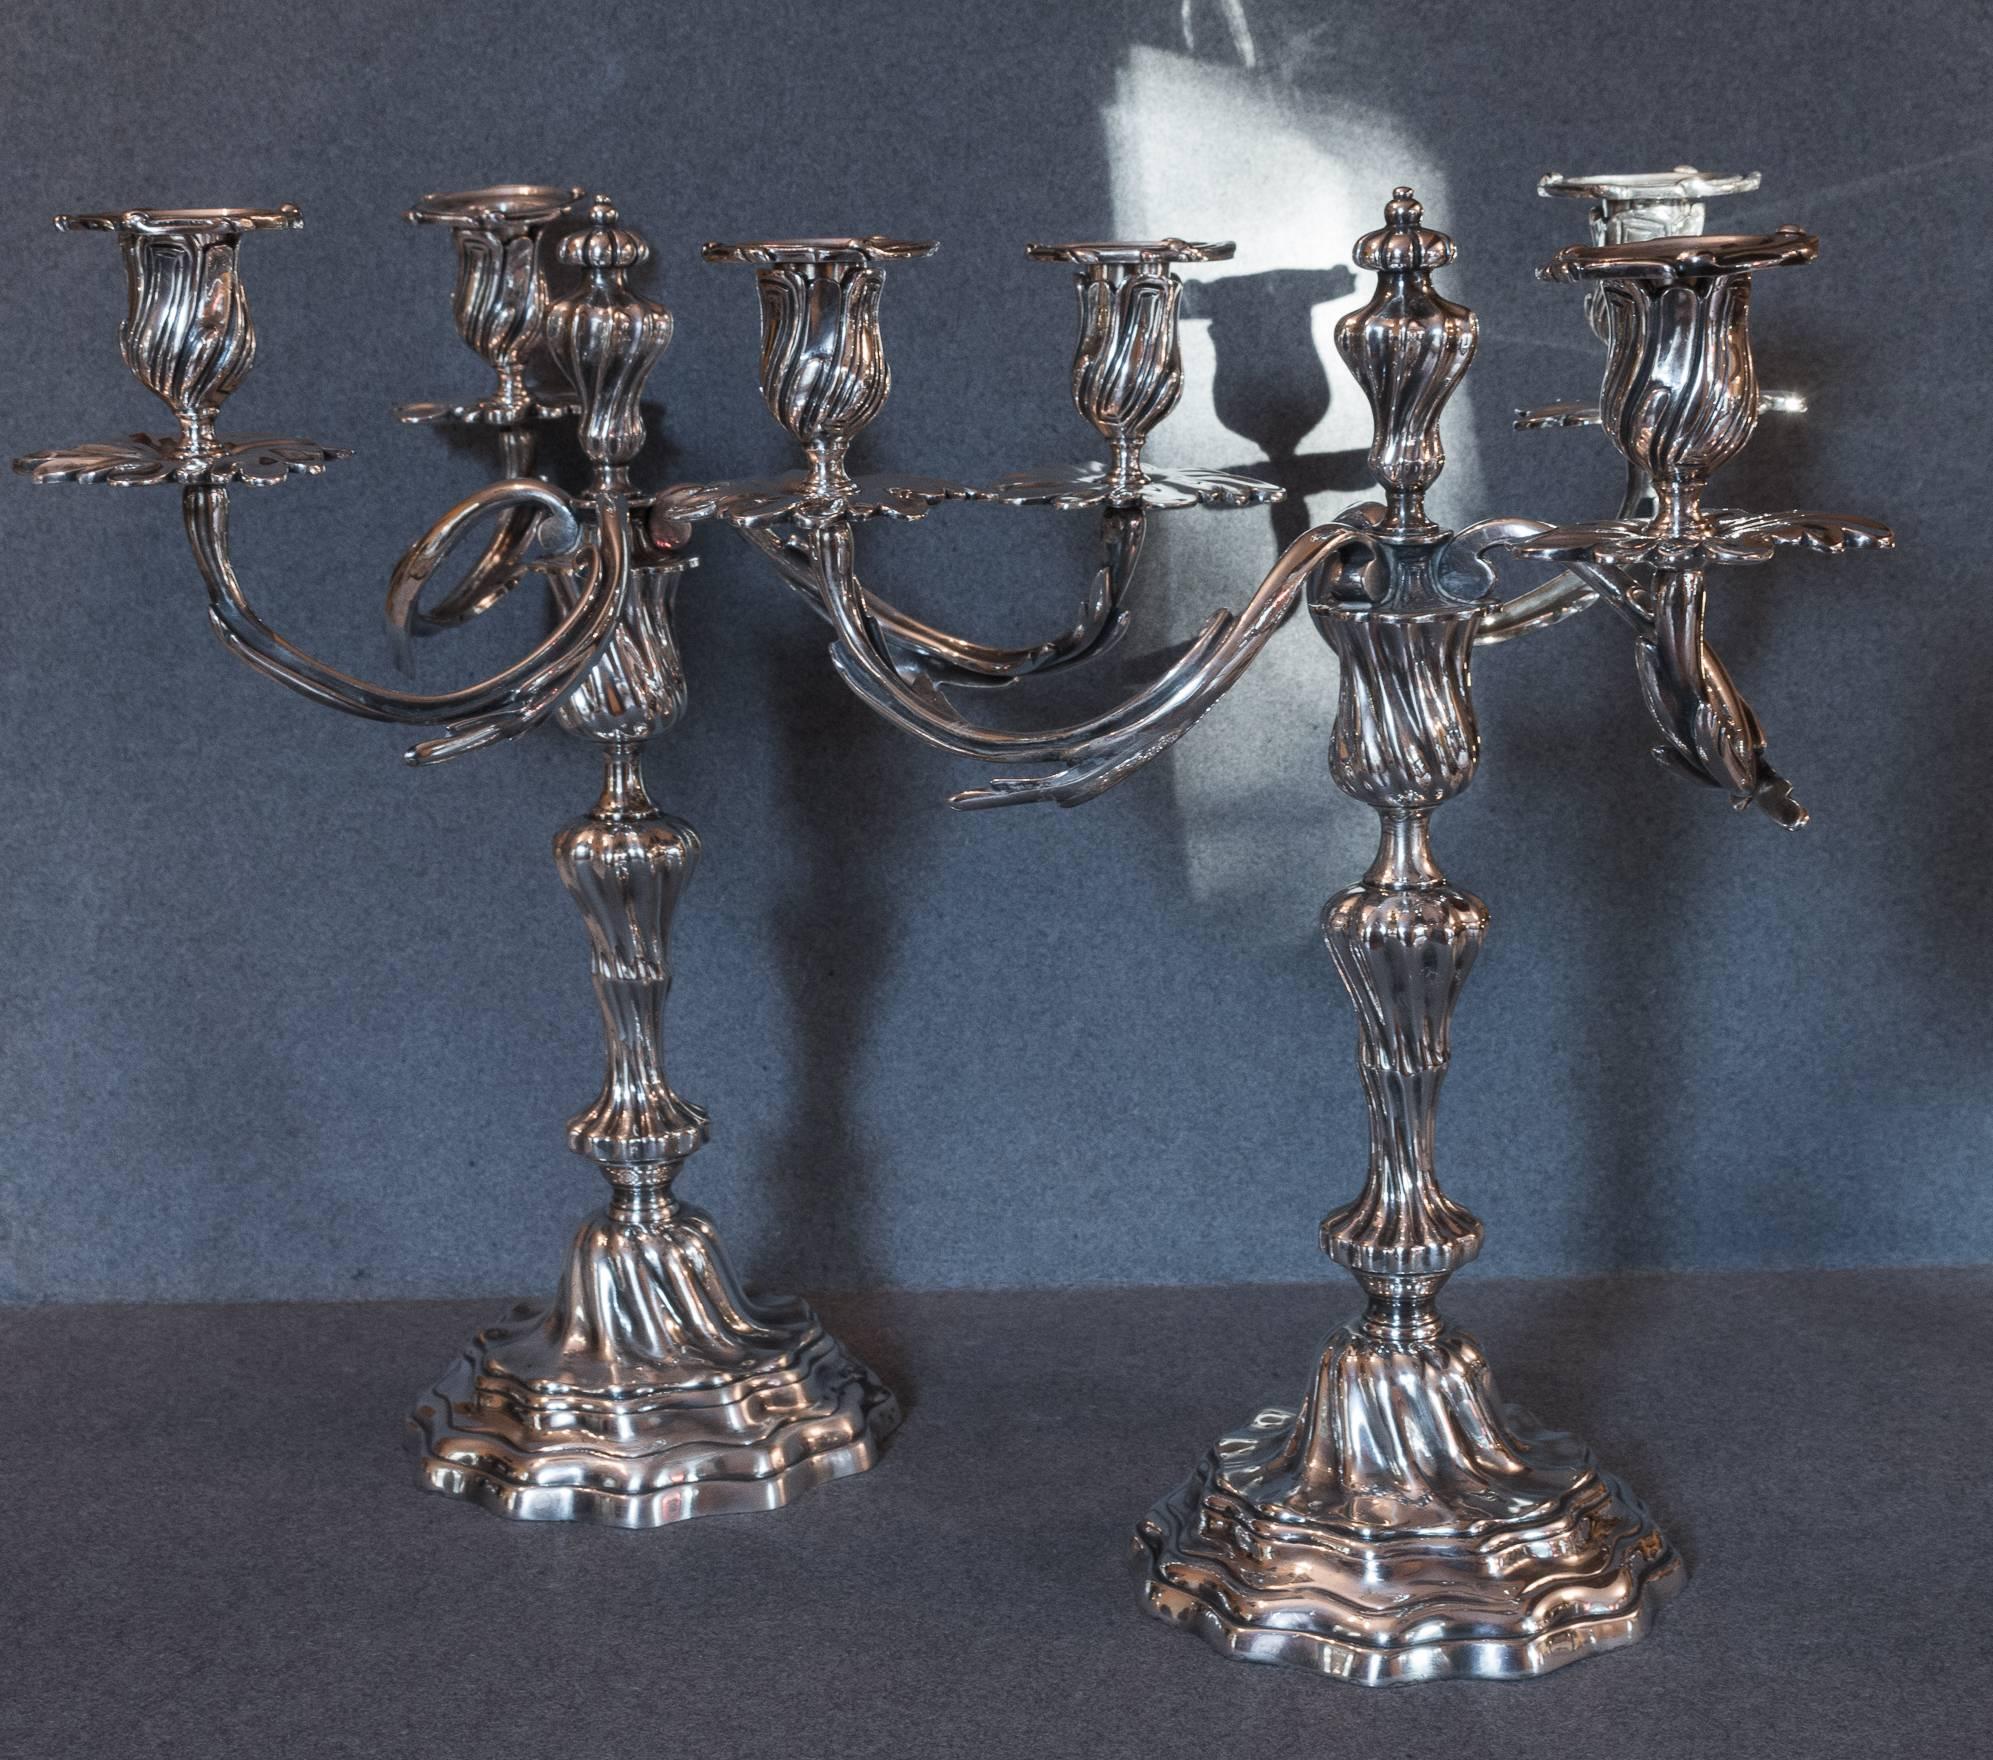 Gorgeous all original pair of fine Louis XV style mid-19th century silver plate three-arm candelabras, the scrolling arms are detachable, converting the pieces to single candlesticks.

Very beautiful French, mid-19th century work, circa